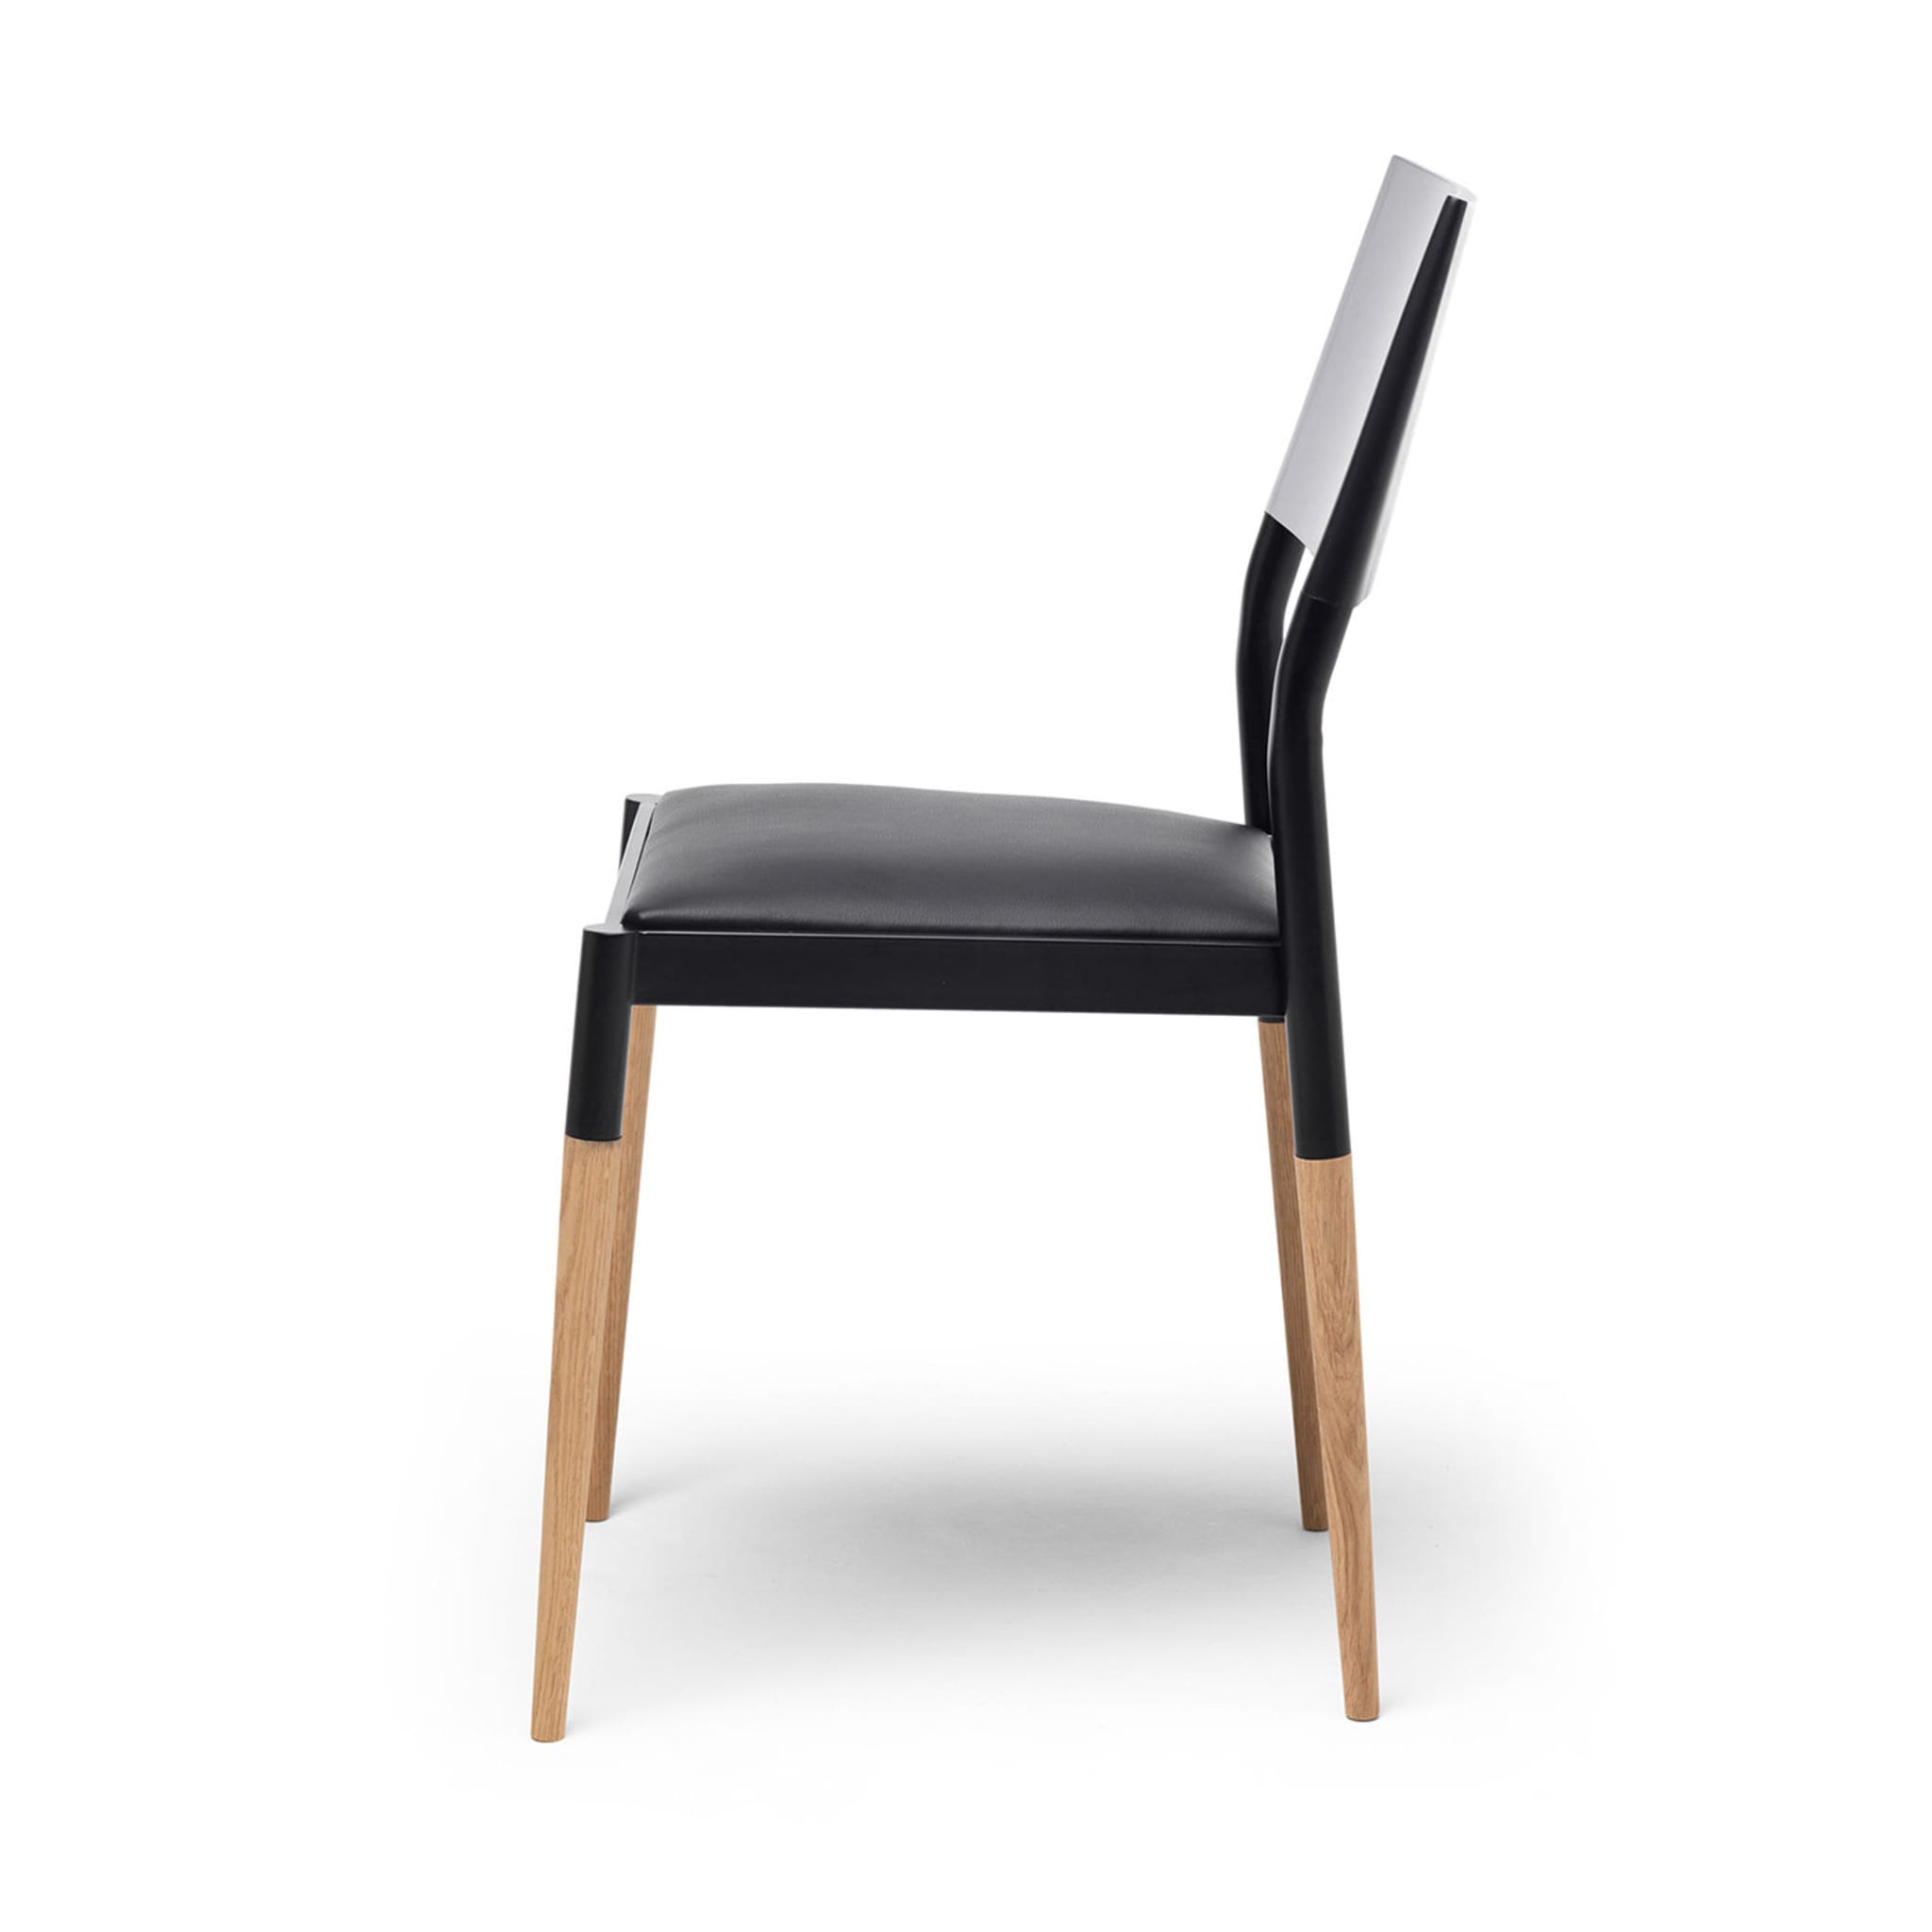 Bic Set of 2 Chairs - Alternative view 3